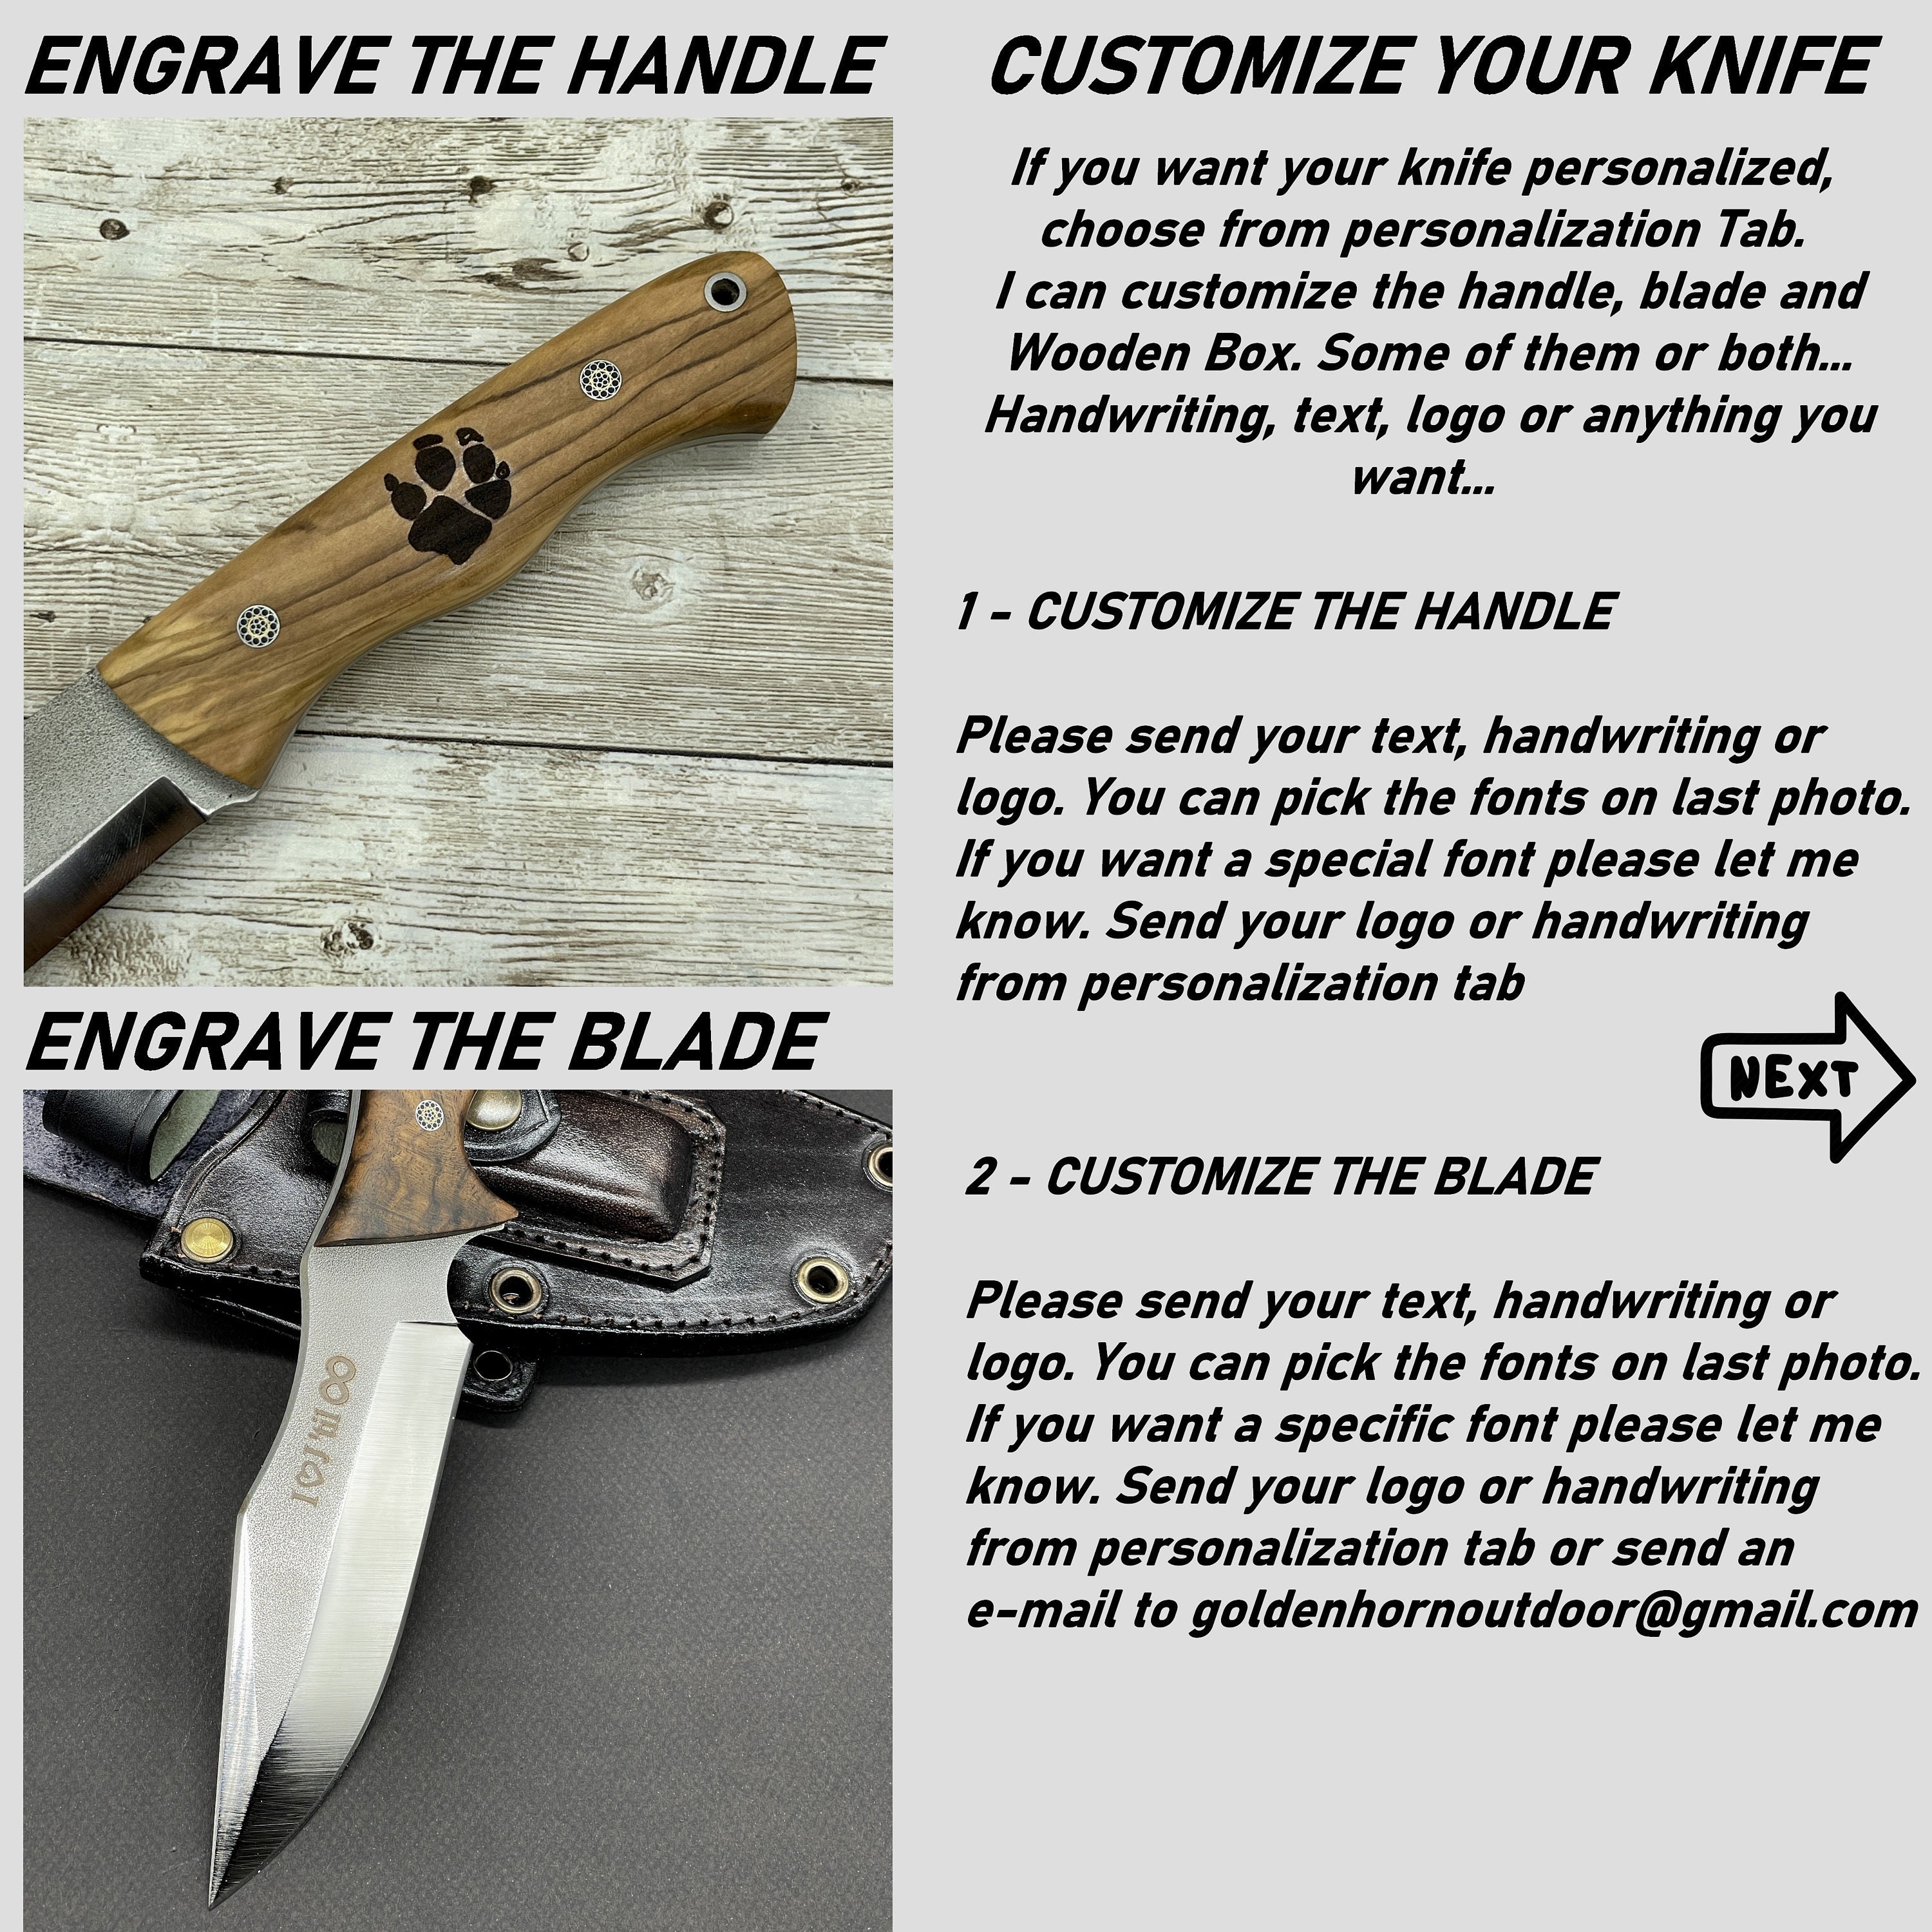 Crafting Your Own Custom Knife Handle: A Step-by-Step Guide